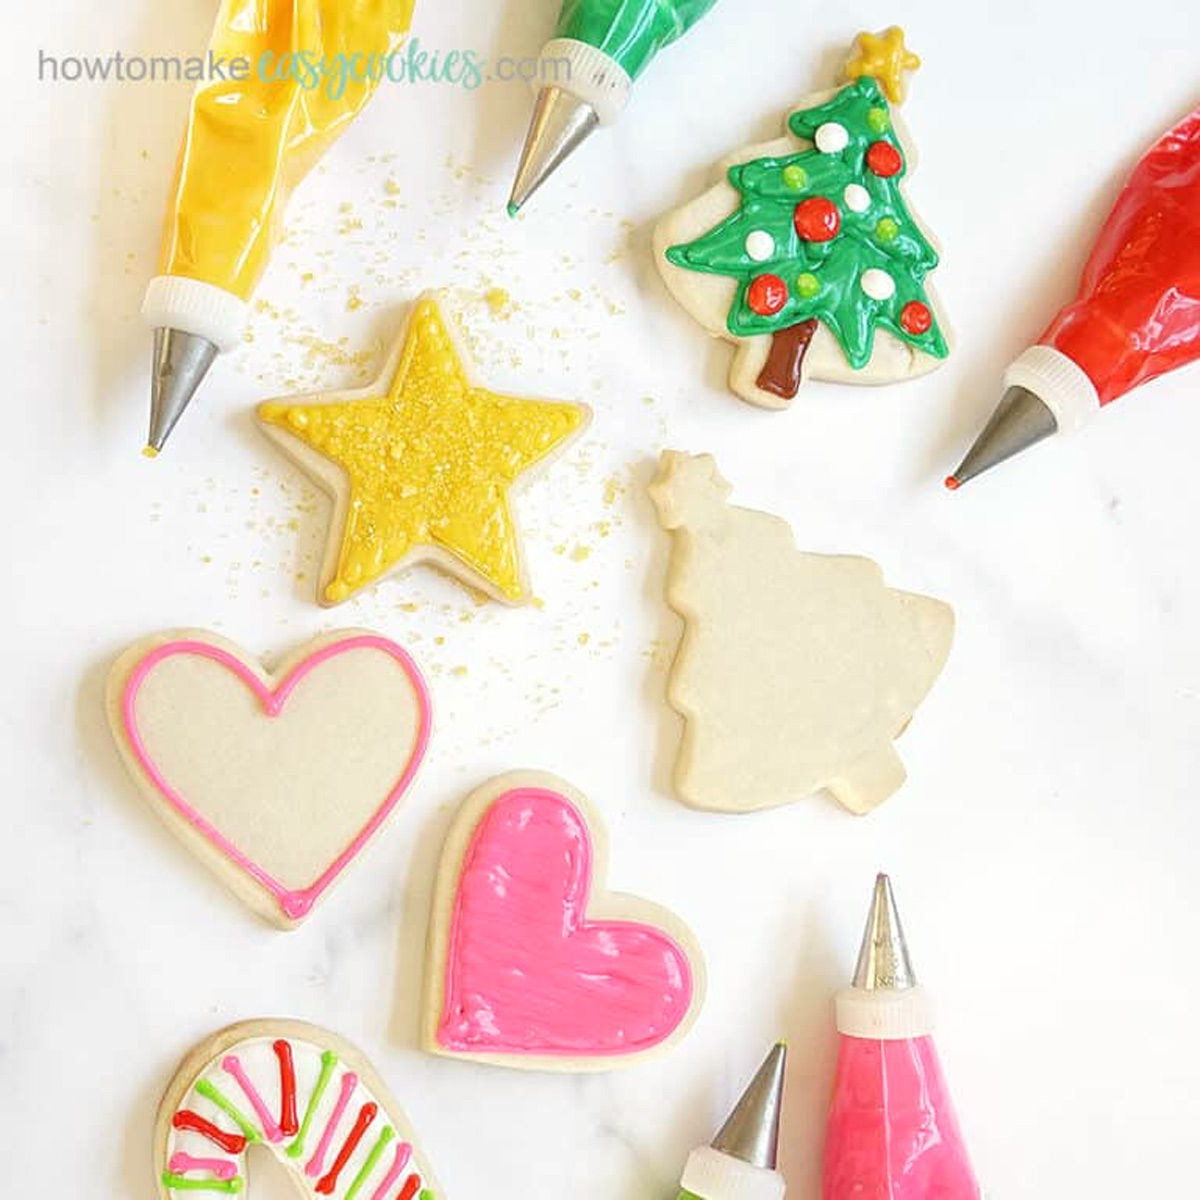 cut-out sugar cookies with powdered sugar and decorate with royal icing